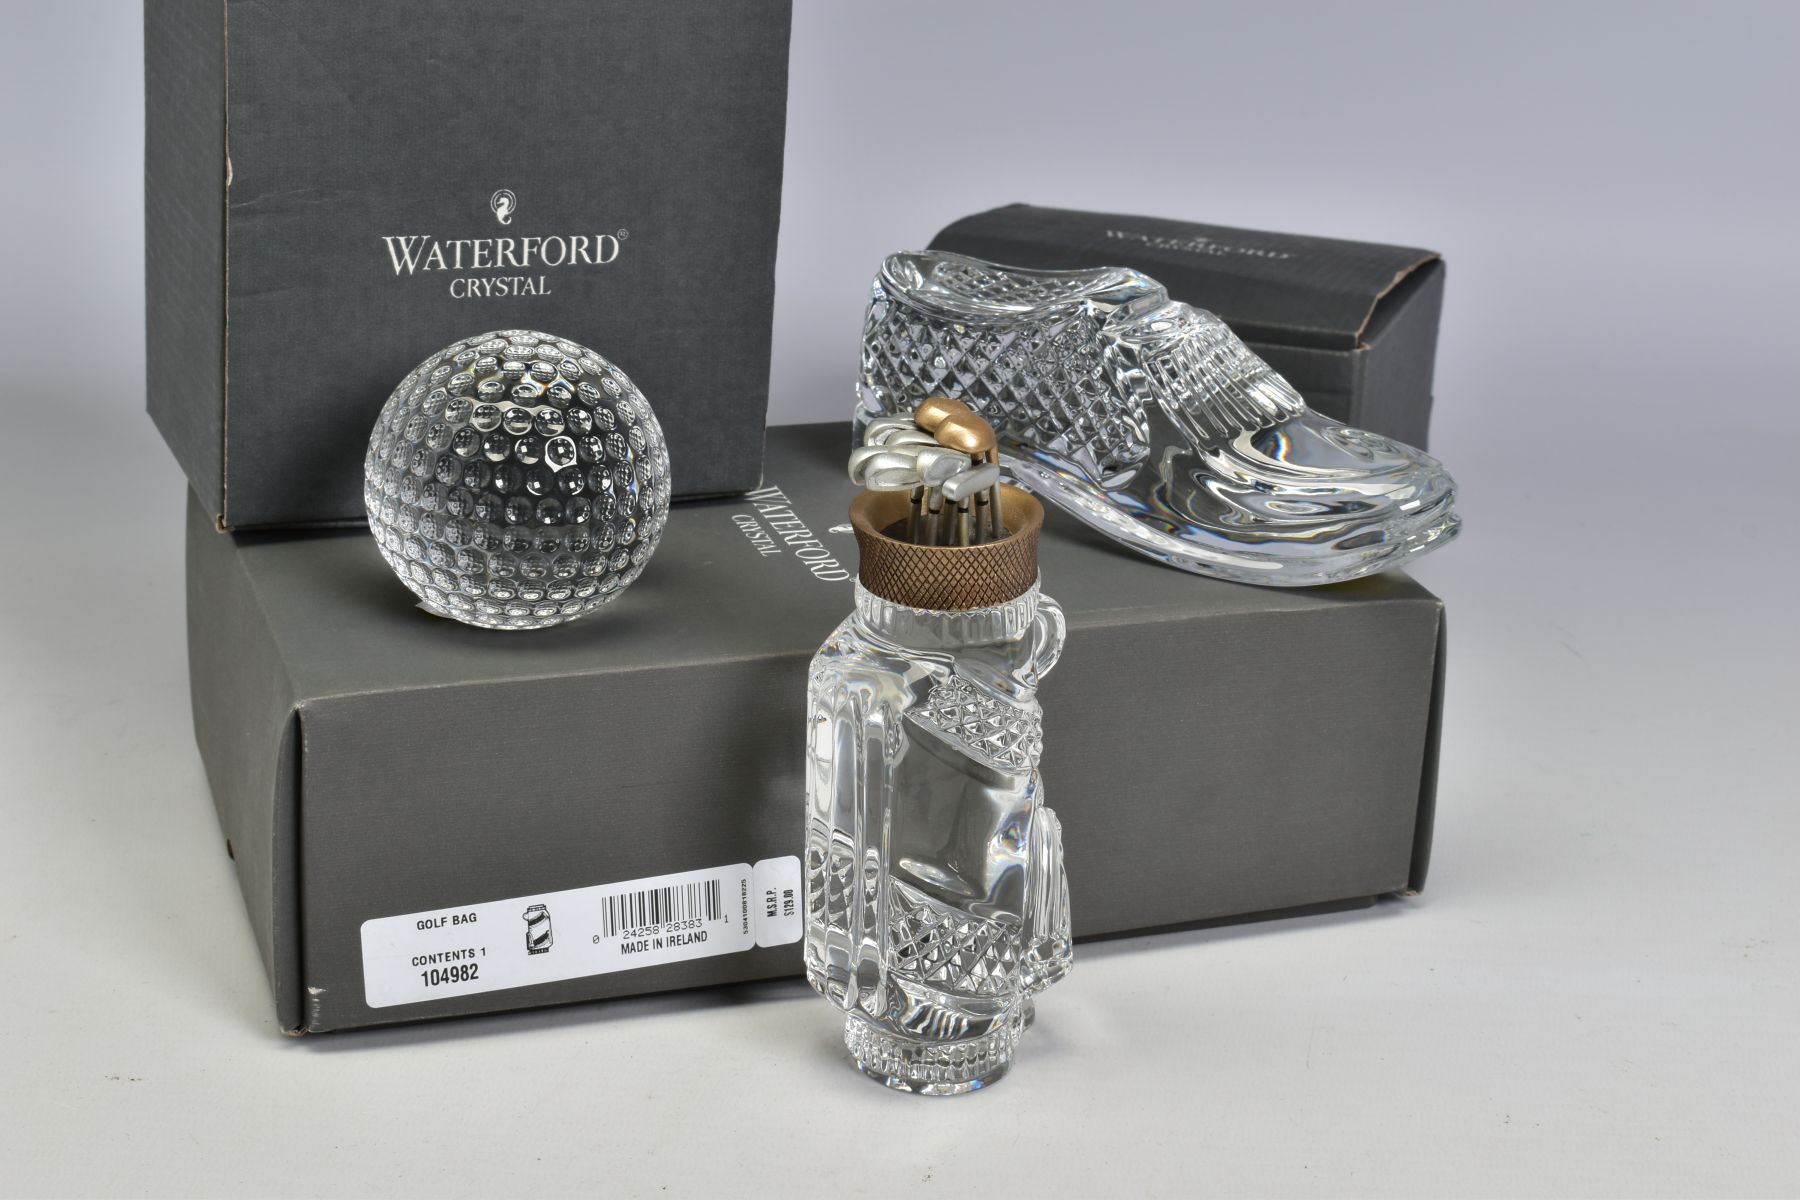 A WATERFORD CRYSTAL BOXED GOLFING THEME SET, comprising a golf bag and clubs, height 13.5cm, a